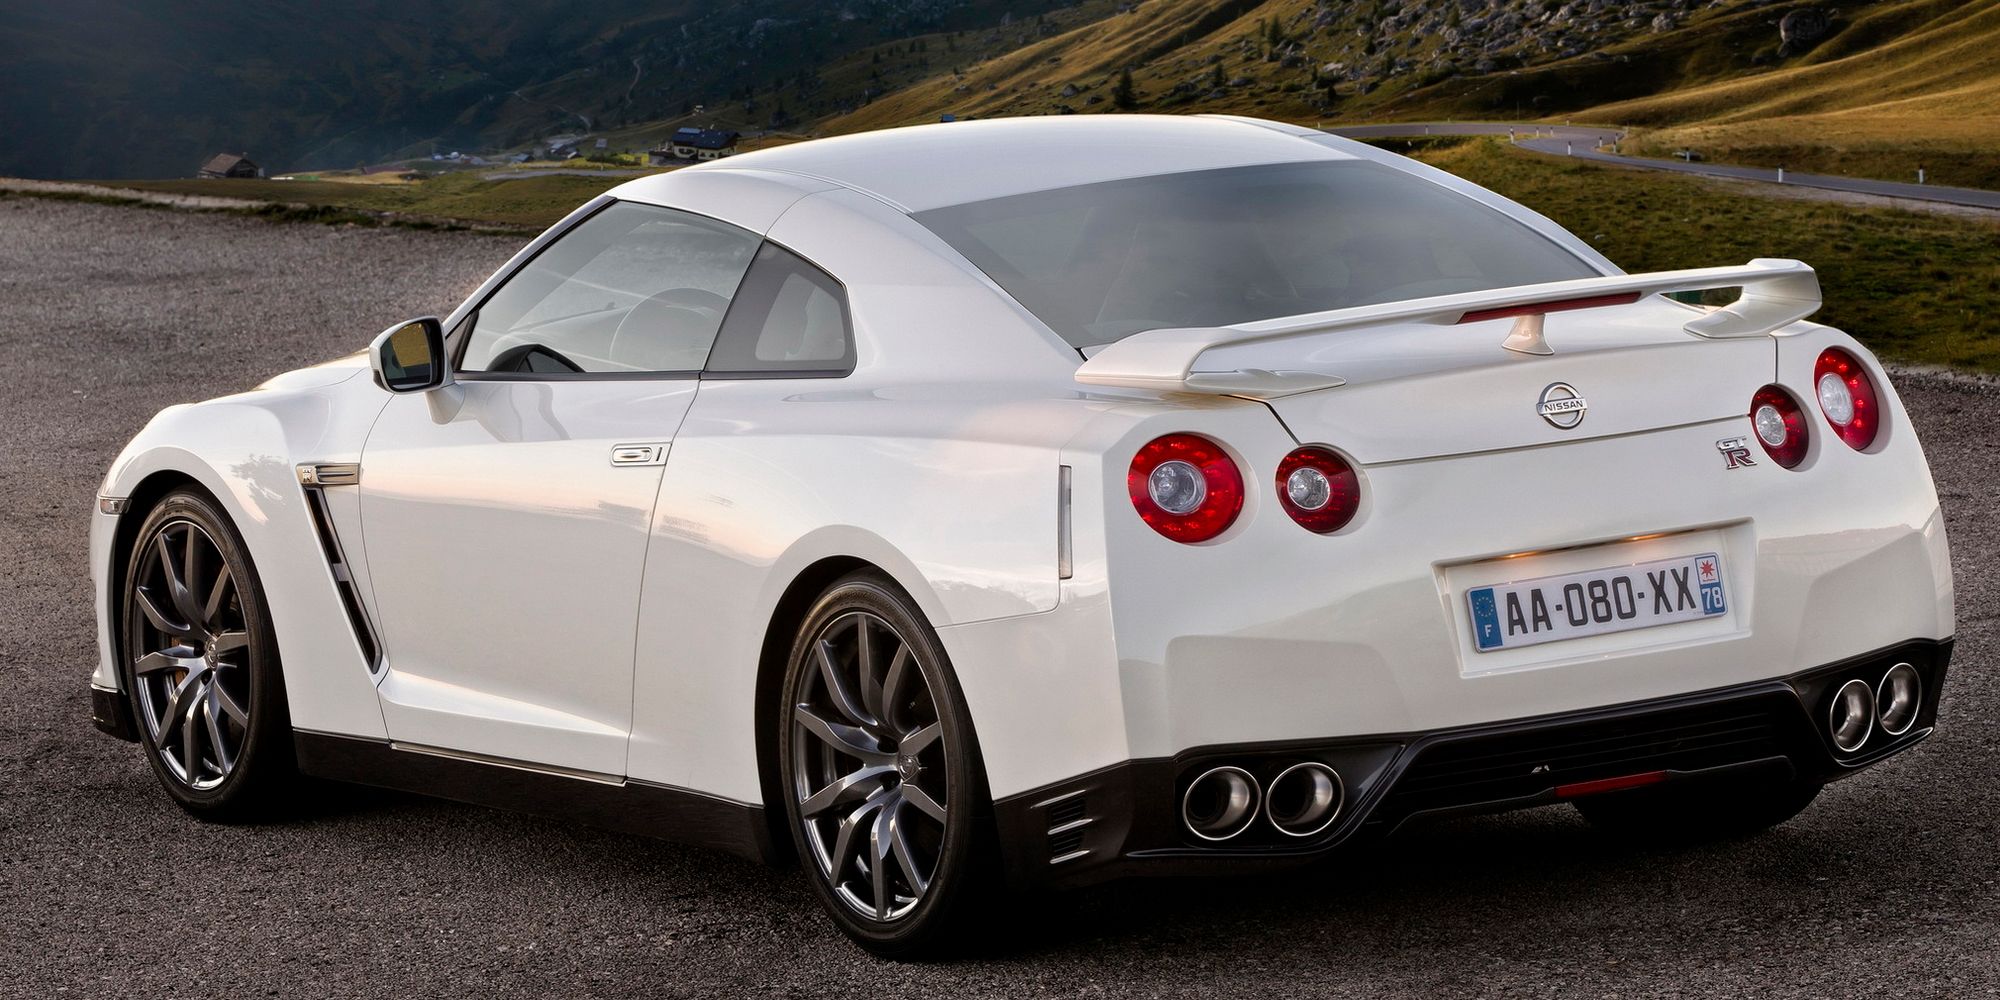 Rear 3/4 view of a white GTR R35 Black Edition